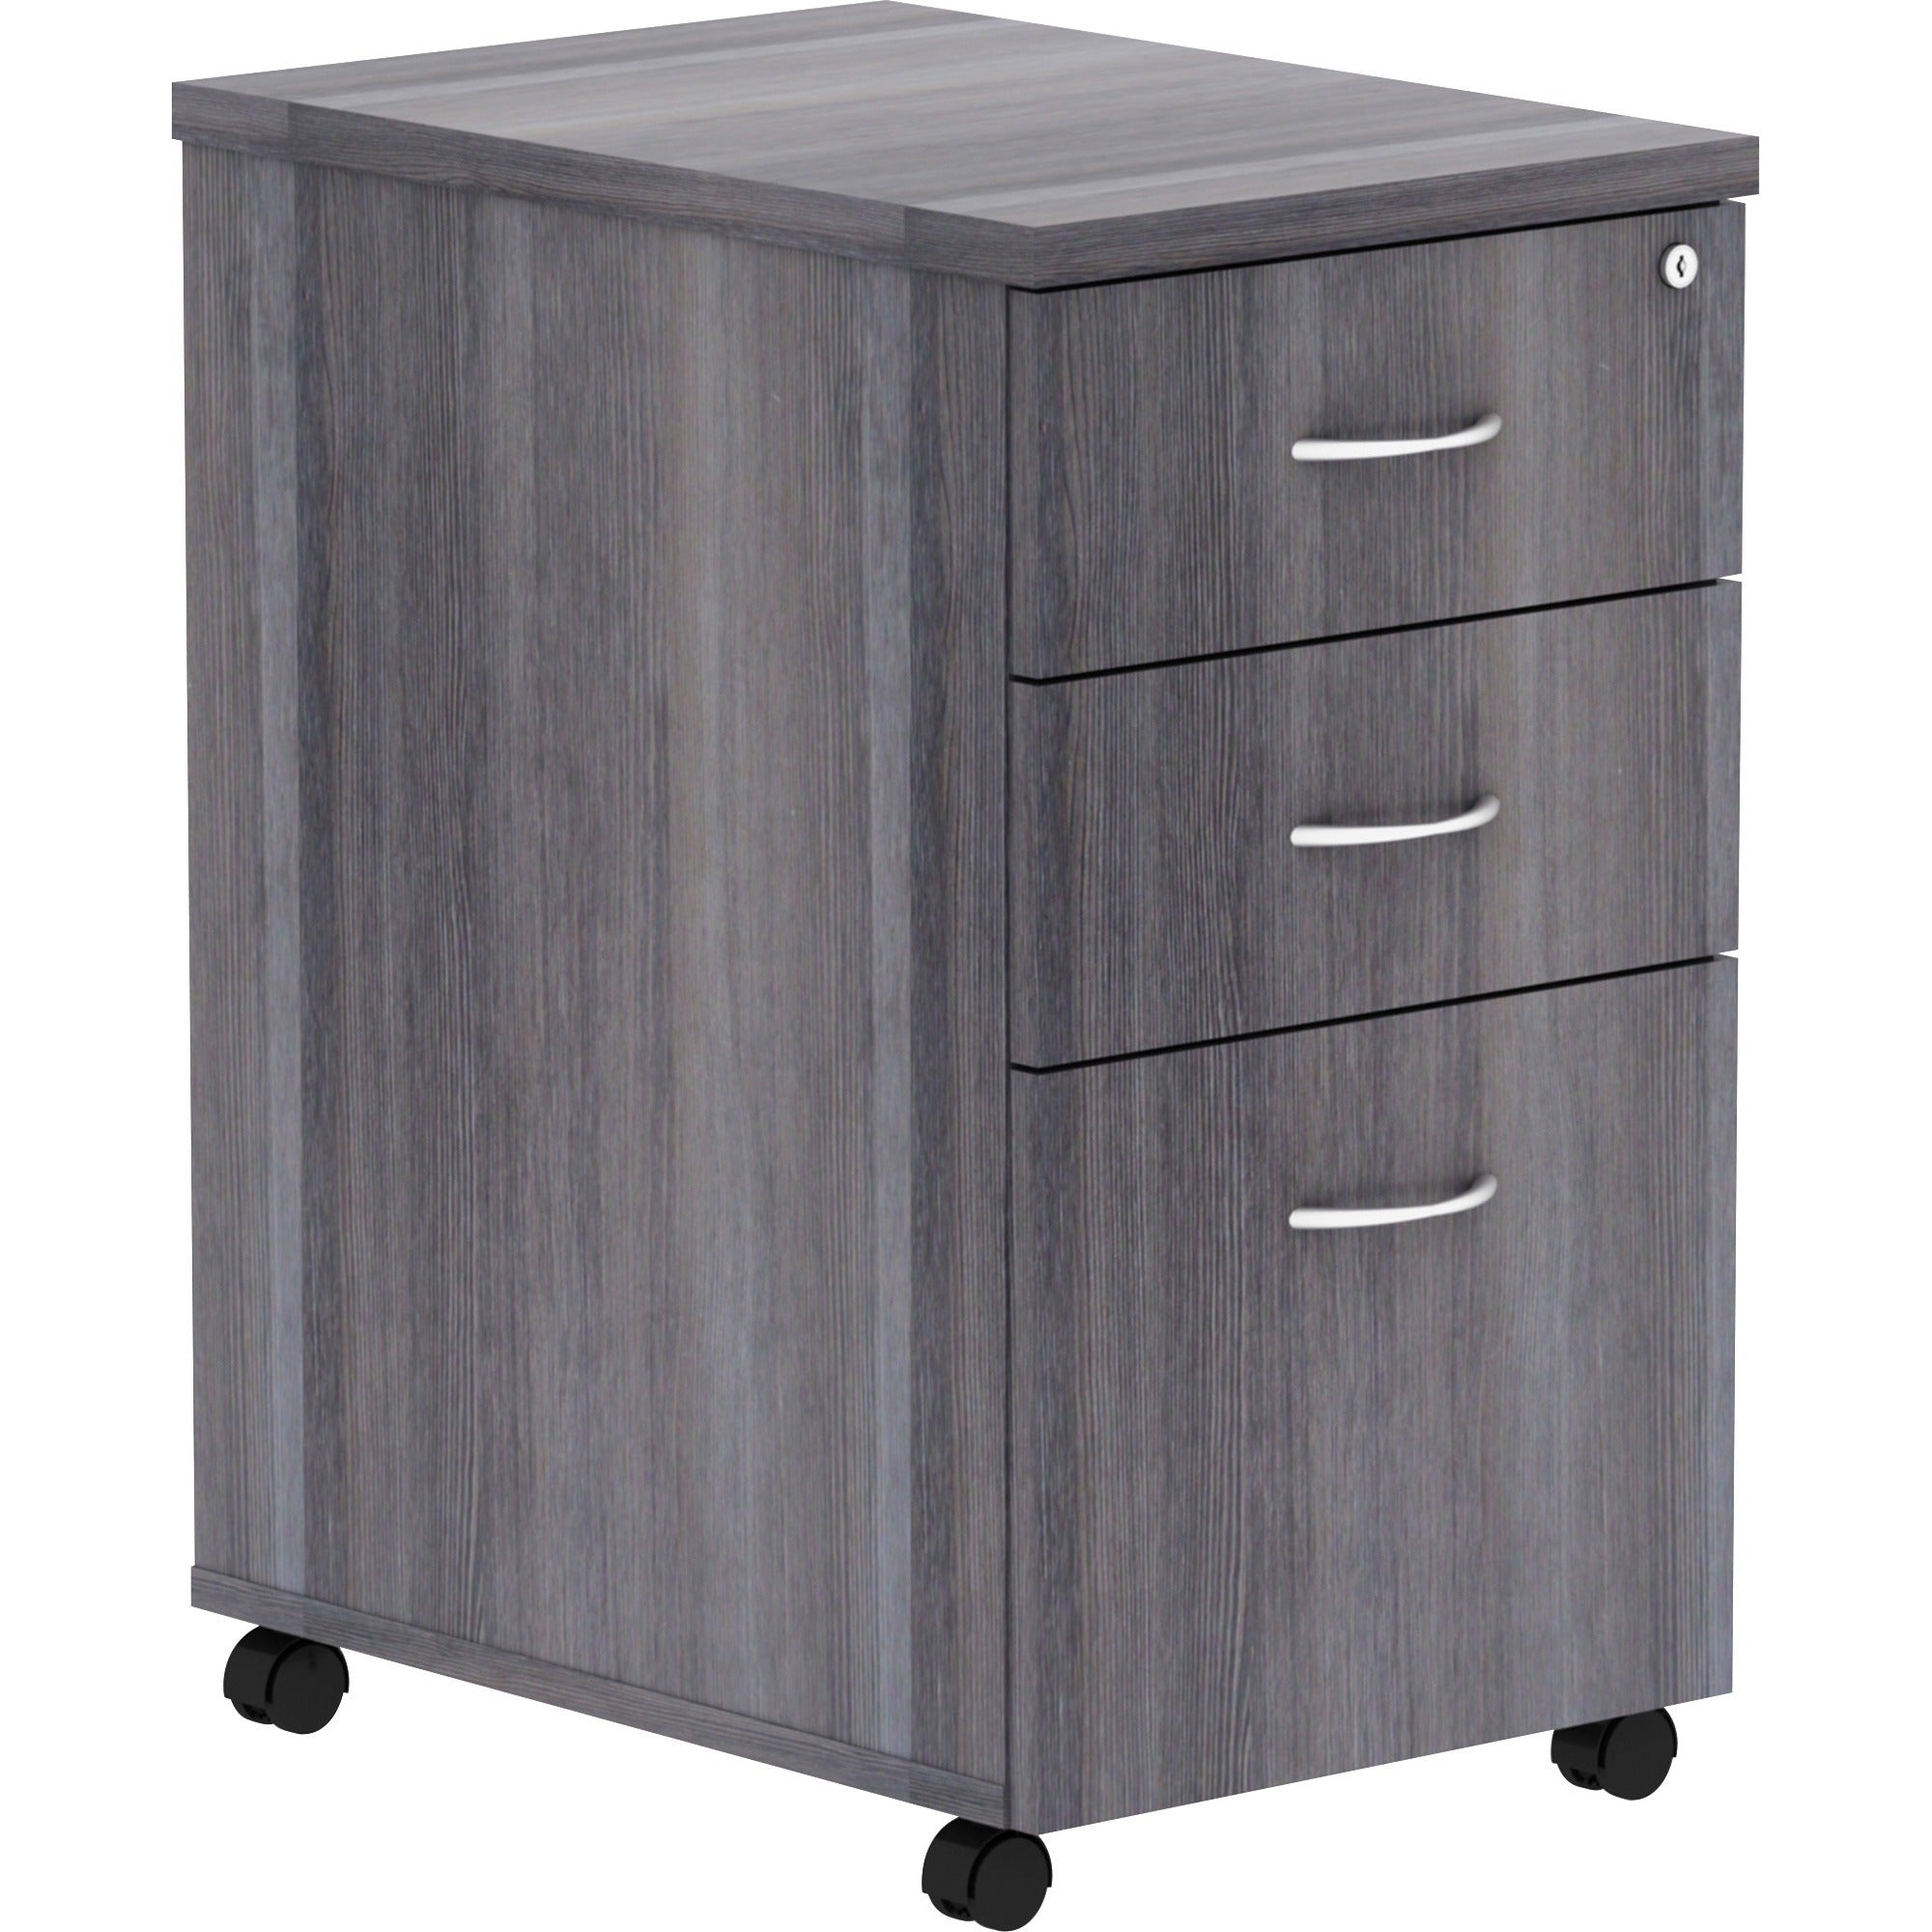 lorell-essentials-series-box-box-file-mobile-file-cabinet-16-x-22283-3-x-box-file-drawers-finish-weathered-charcoal-laminate_llr69560 - 1